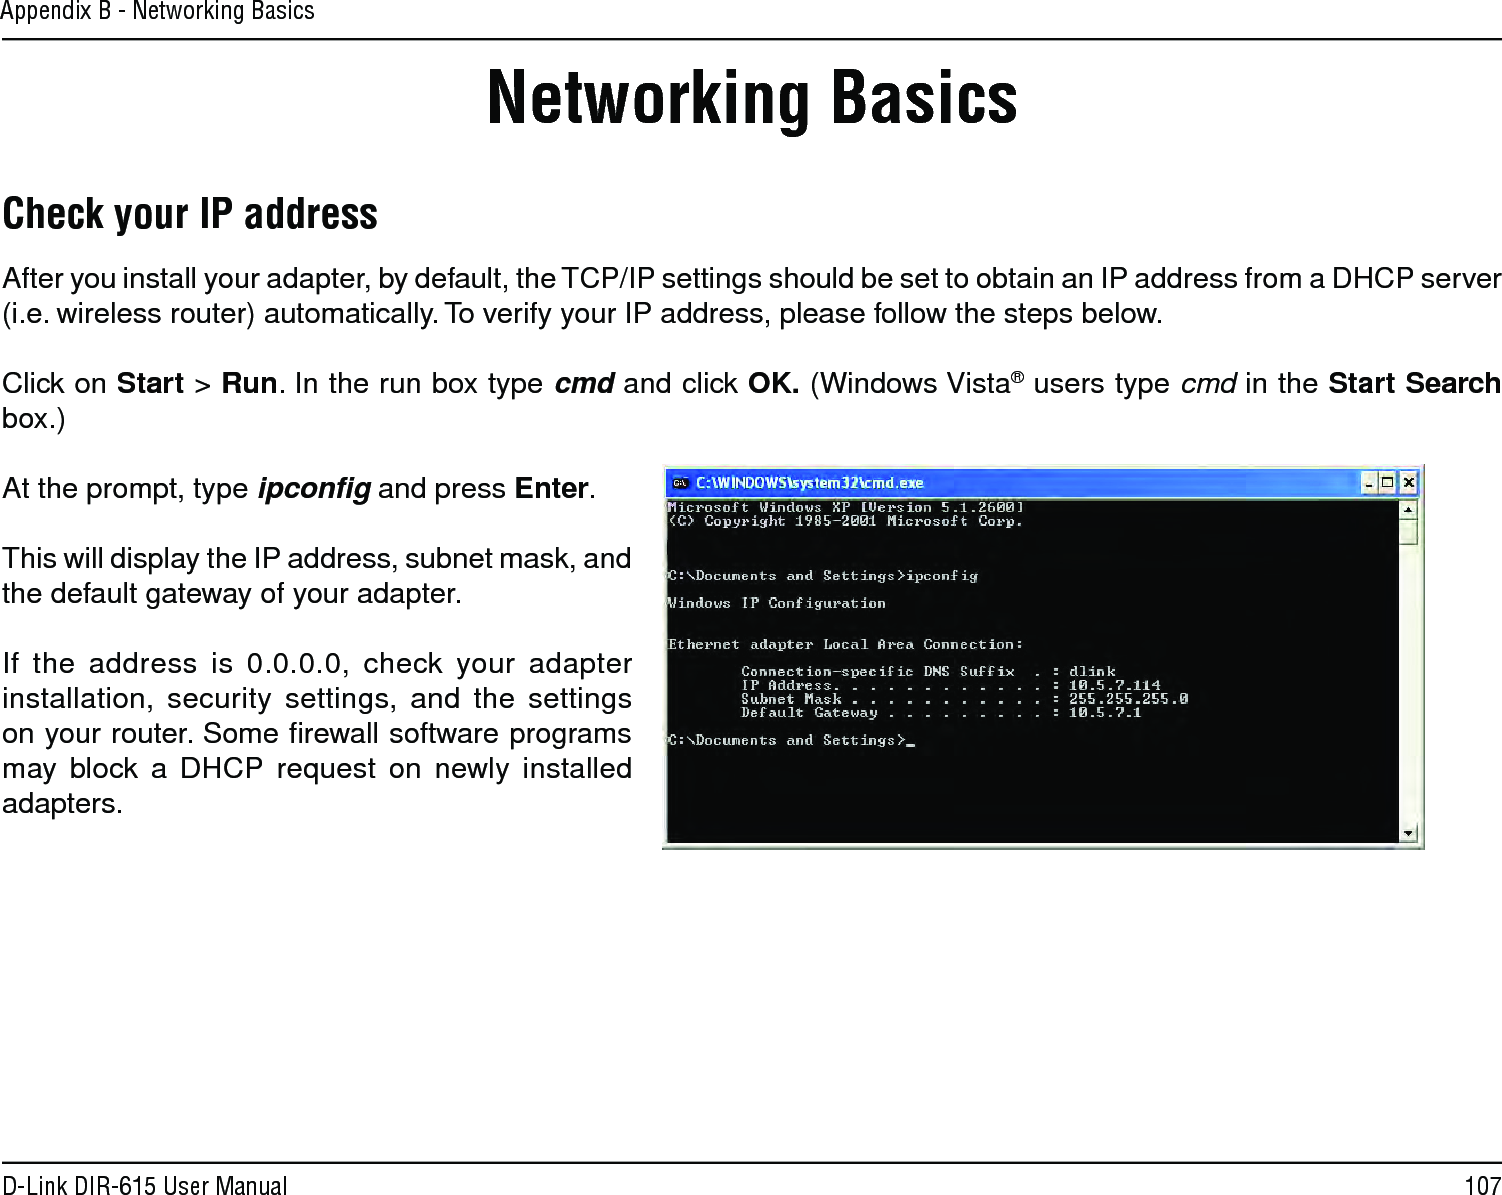 107D-Link DIR-615 User ManualAppendix B - Networking BasicsNetworking BasicsCheck your IP addressAfter you install your adapter, by default, the TCP/IP settings should be set to obtain an IP address from a DHCP server (i.e. wireless router) automatically. To verify your IP address, please follow the steps below.Click on Start &gt; Run. In the run box type cmd and click OK. (Windows Vista® users type cmd in the Start Search box.)At the prompt, type ipconﬁg and press Enter.This will display the IP address, subnet mask, and the default gateway of your adapter.If the address is 0.0.0.0, check your adapter installation, security settings, and the settings on your router. Some ﬁrewall software programs may block a DHCP request on newly installed adapters. 